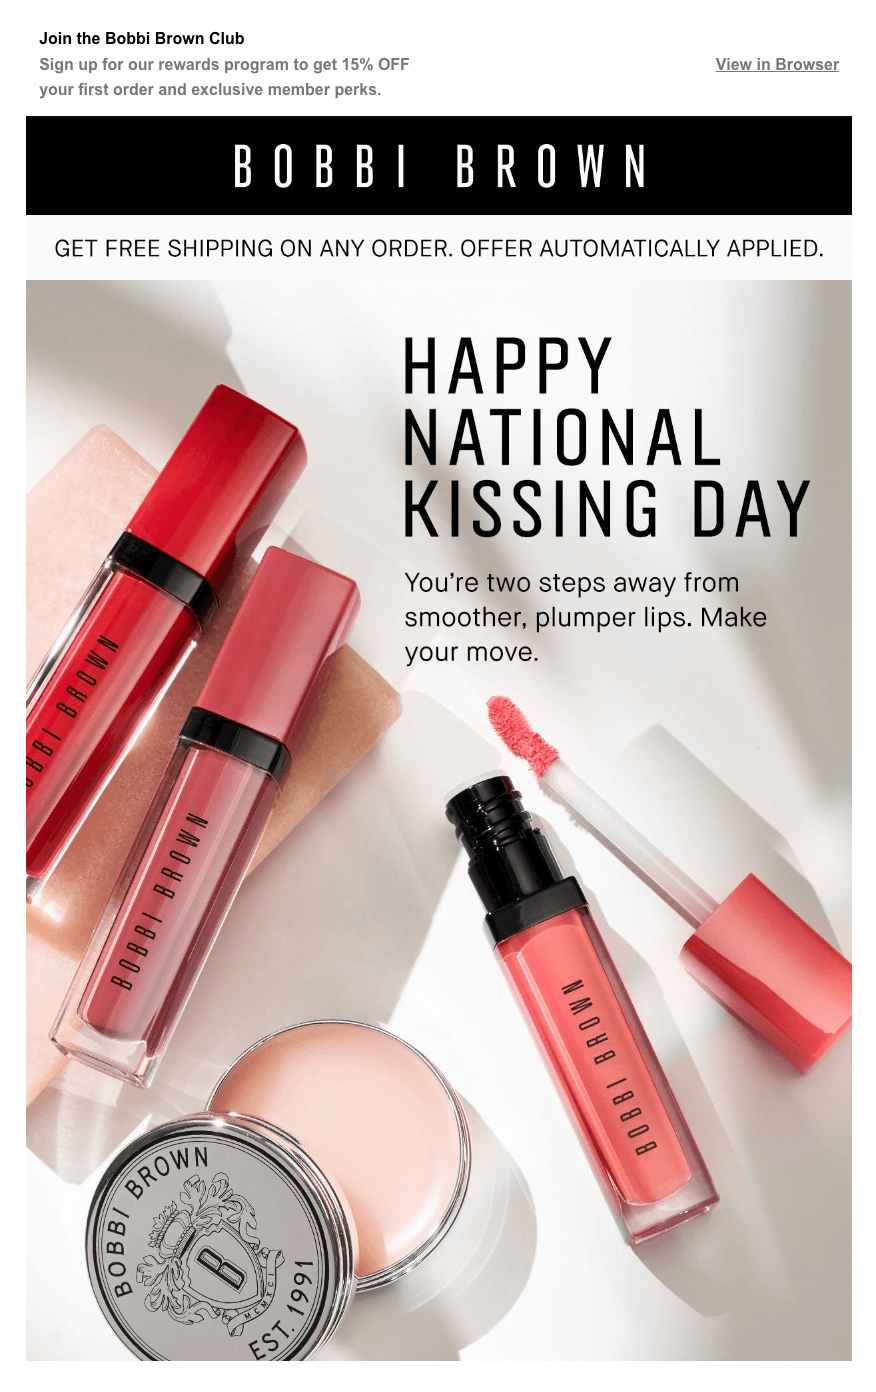 National Kissing Day newsletter by Bobbi Brown 